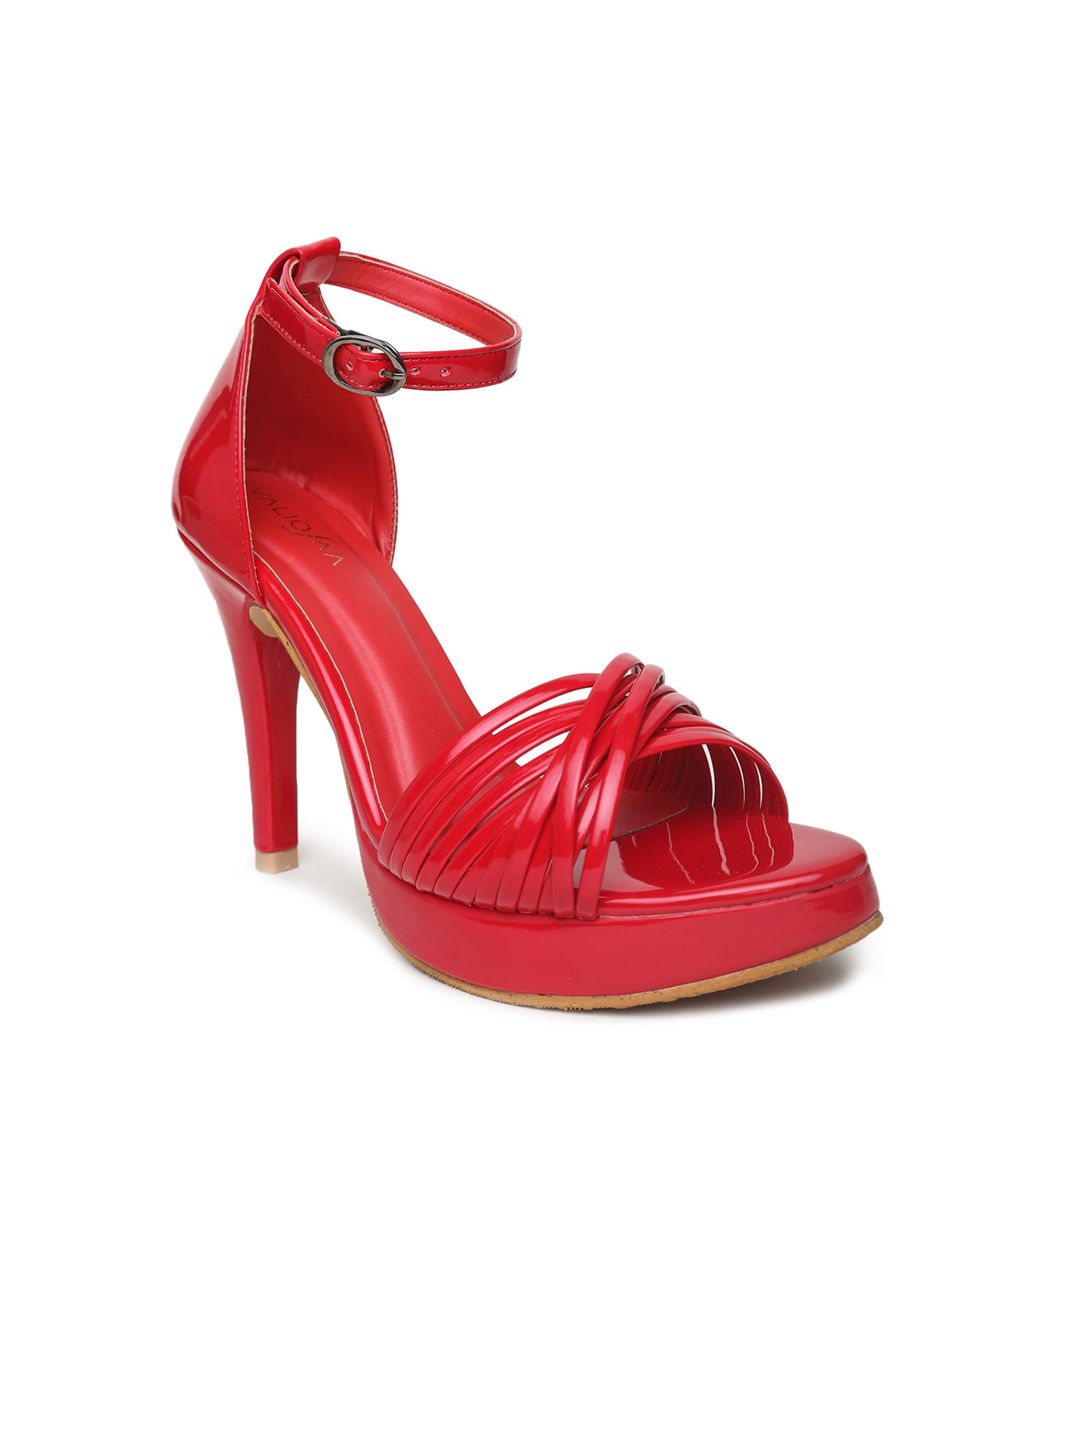 VALIOSAA Red Party Stiletto Ankle Loop Sandals Price in India